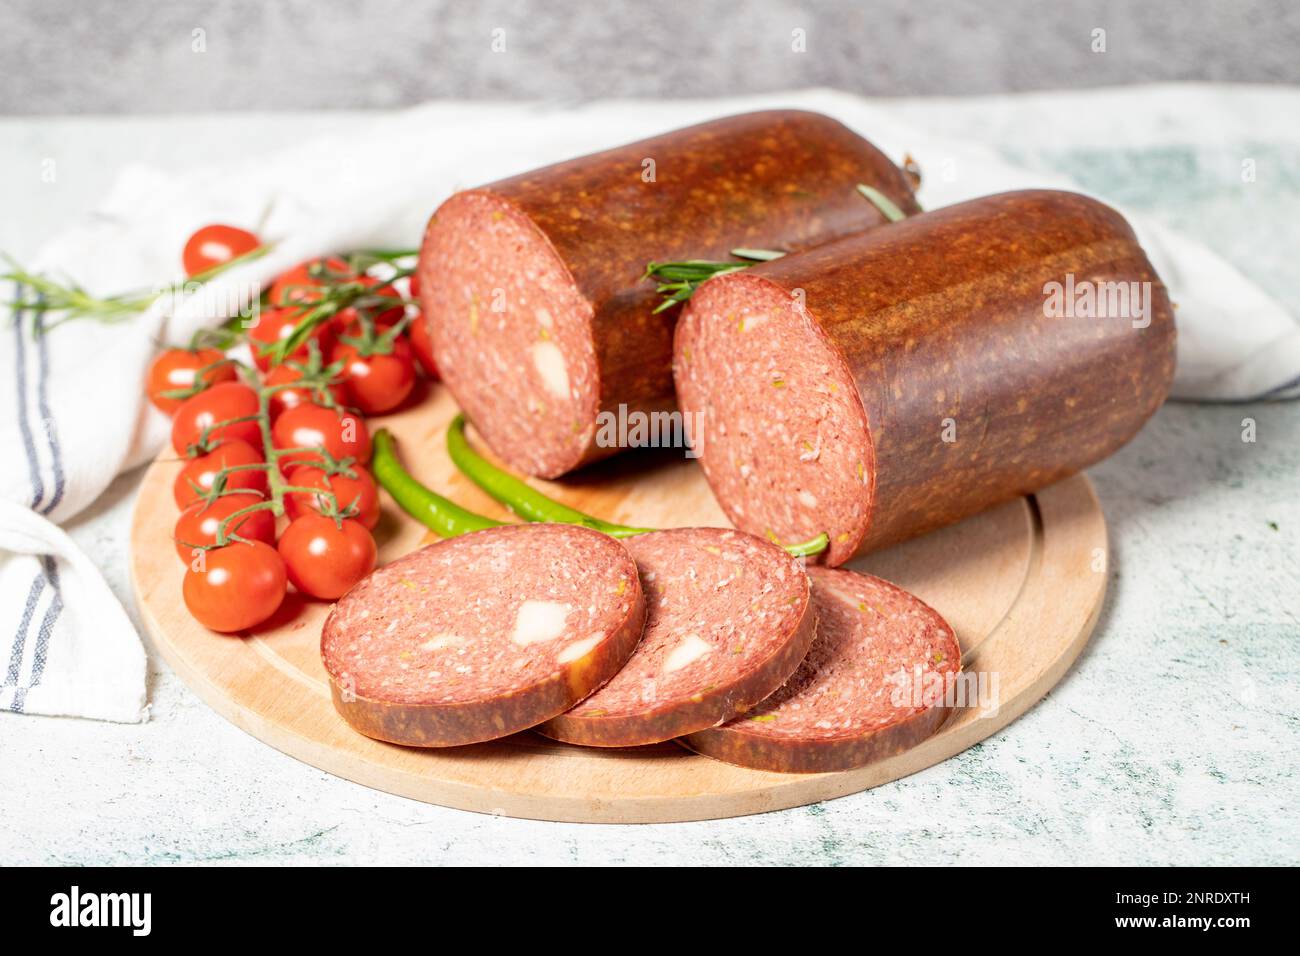 Beef sausage with cheddar. Raw grilled sausage on a wood serving board. Deli products Stock Photo